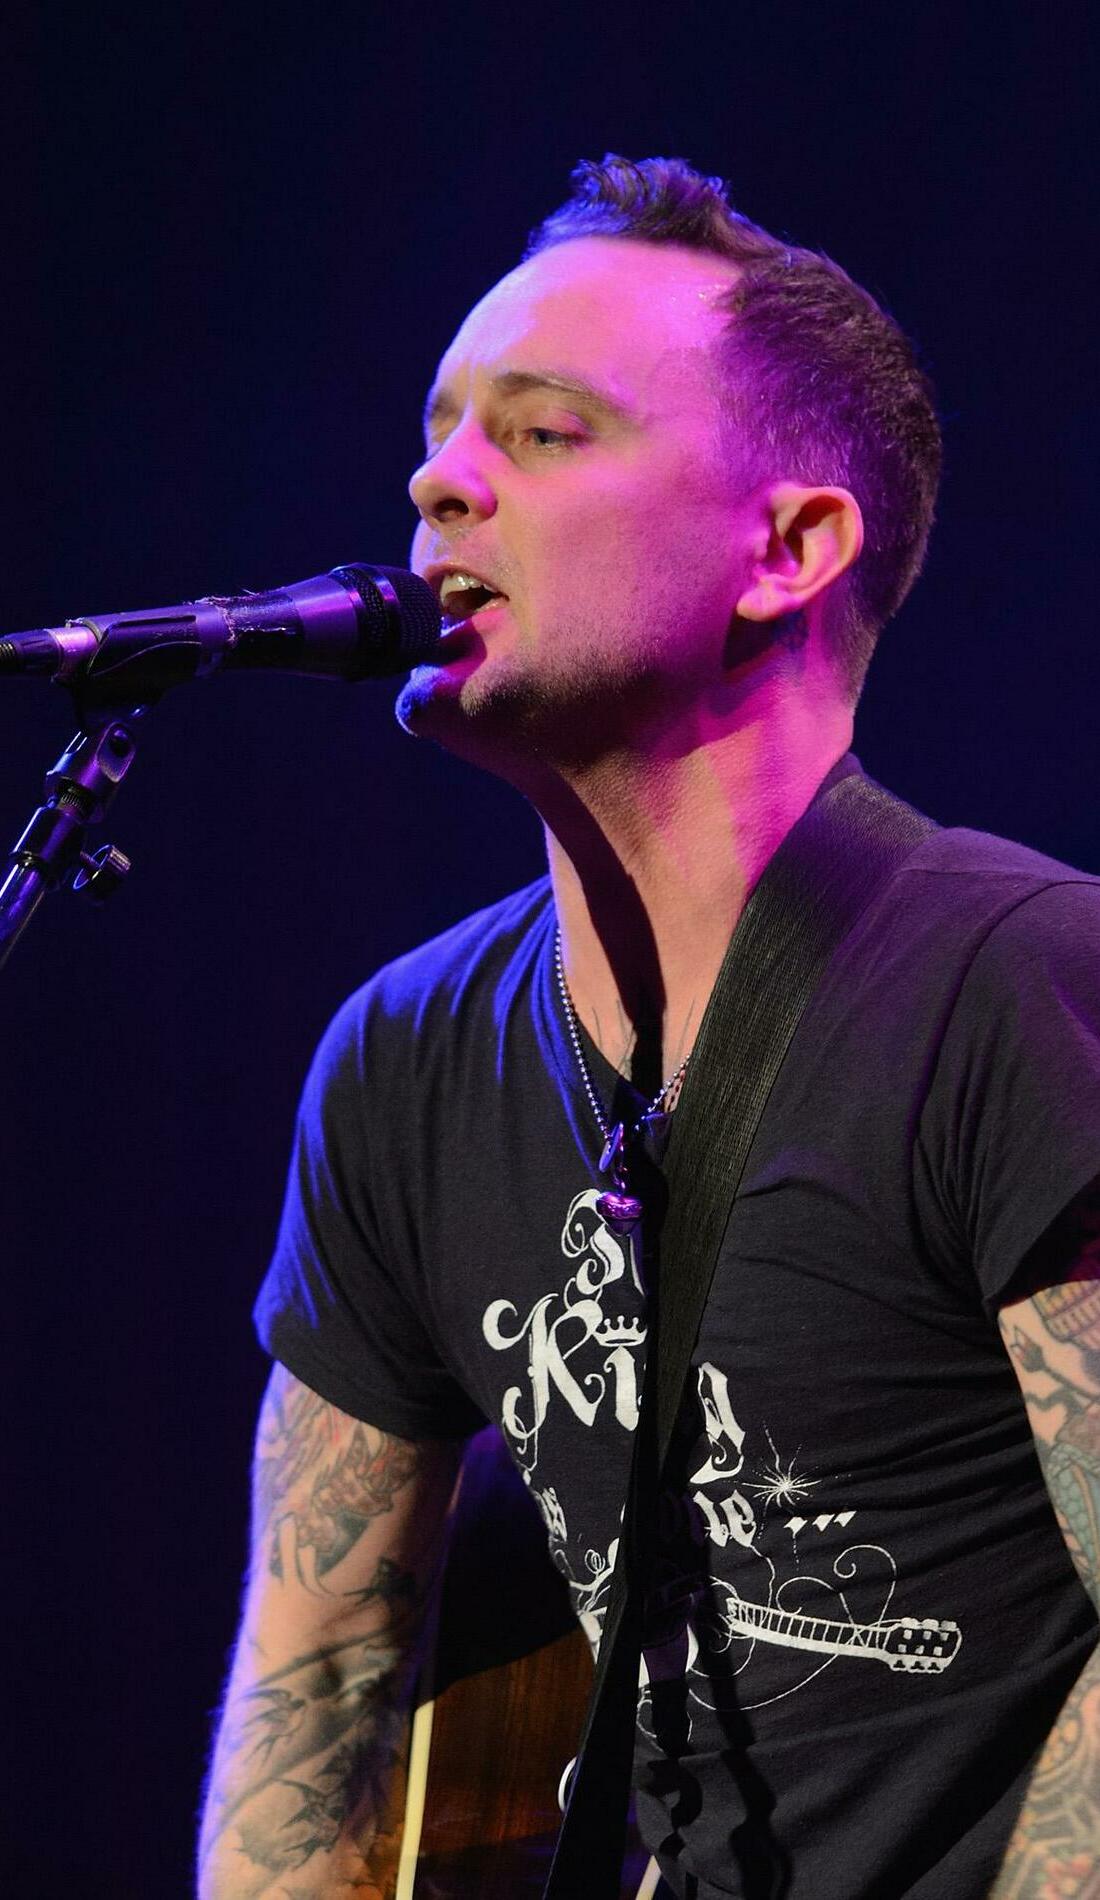 A Dave Hause live event